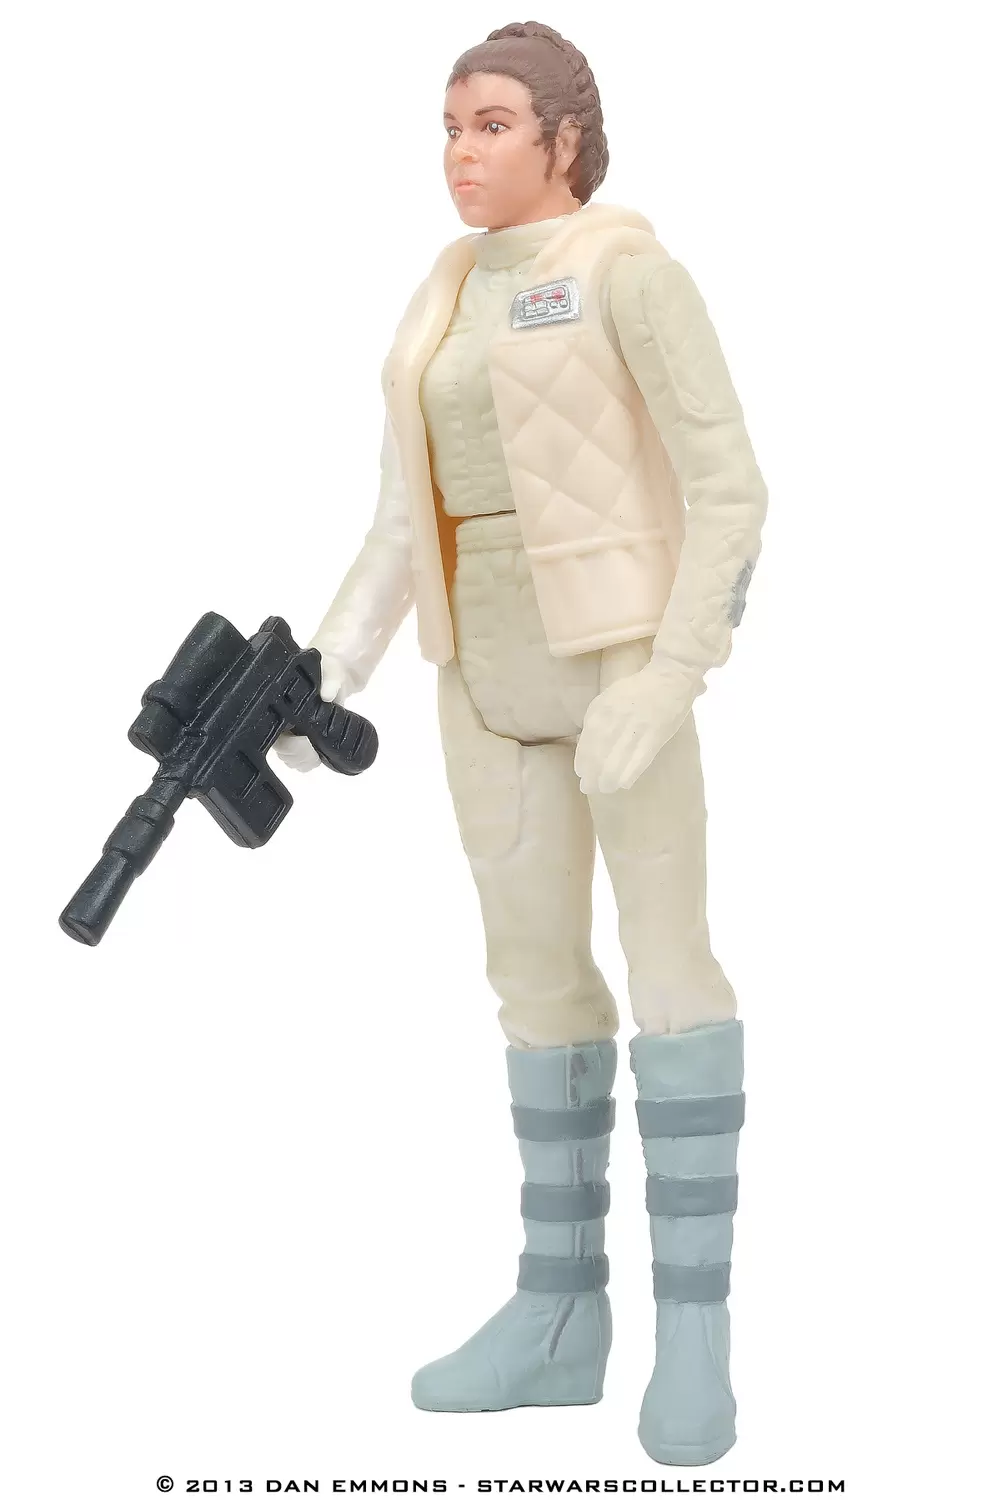 Power of the Force 2 - Princess Leia Organa in Hoth Gear